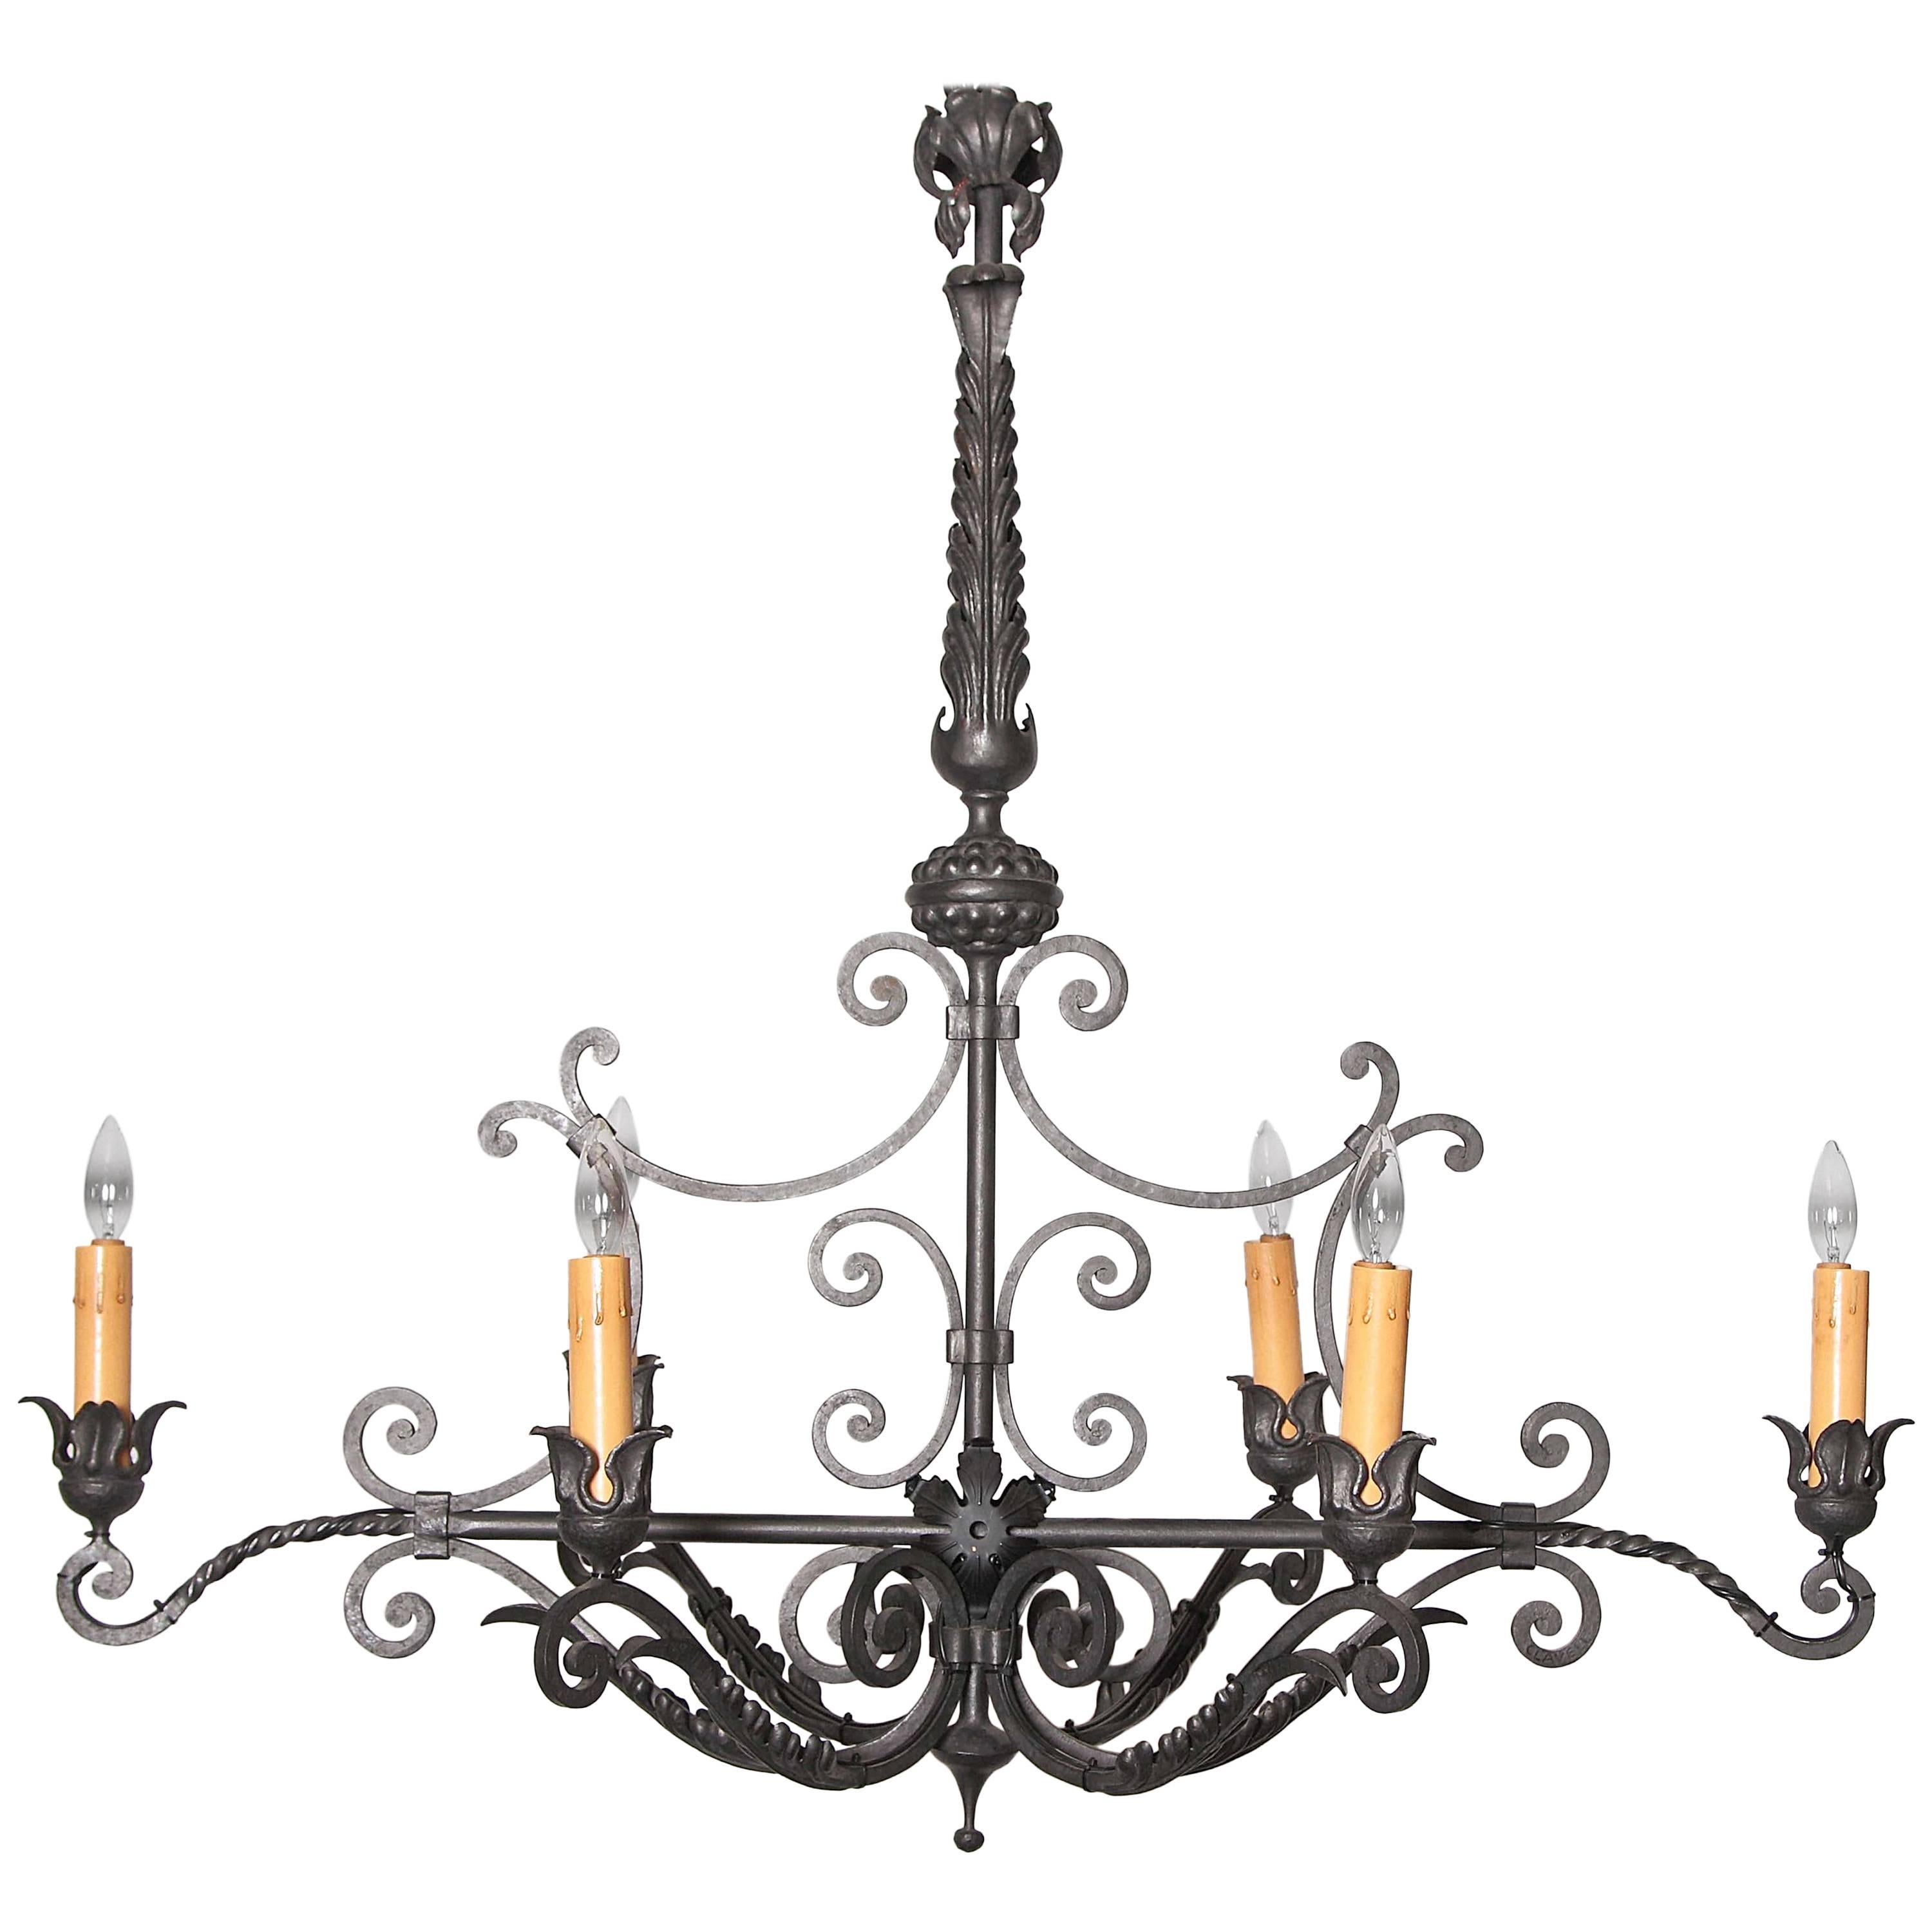 Long Mid-20th Century French Six-Light Iron Chandelier with Ornate Top